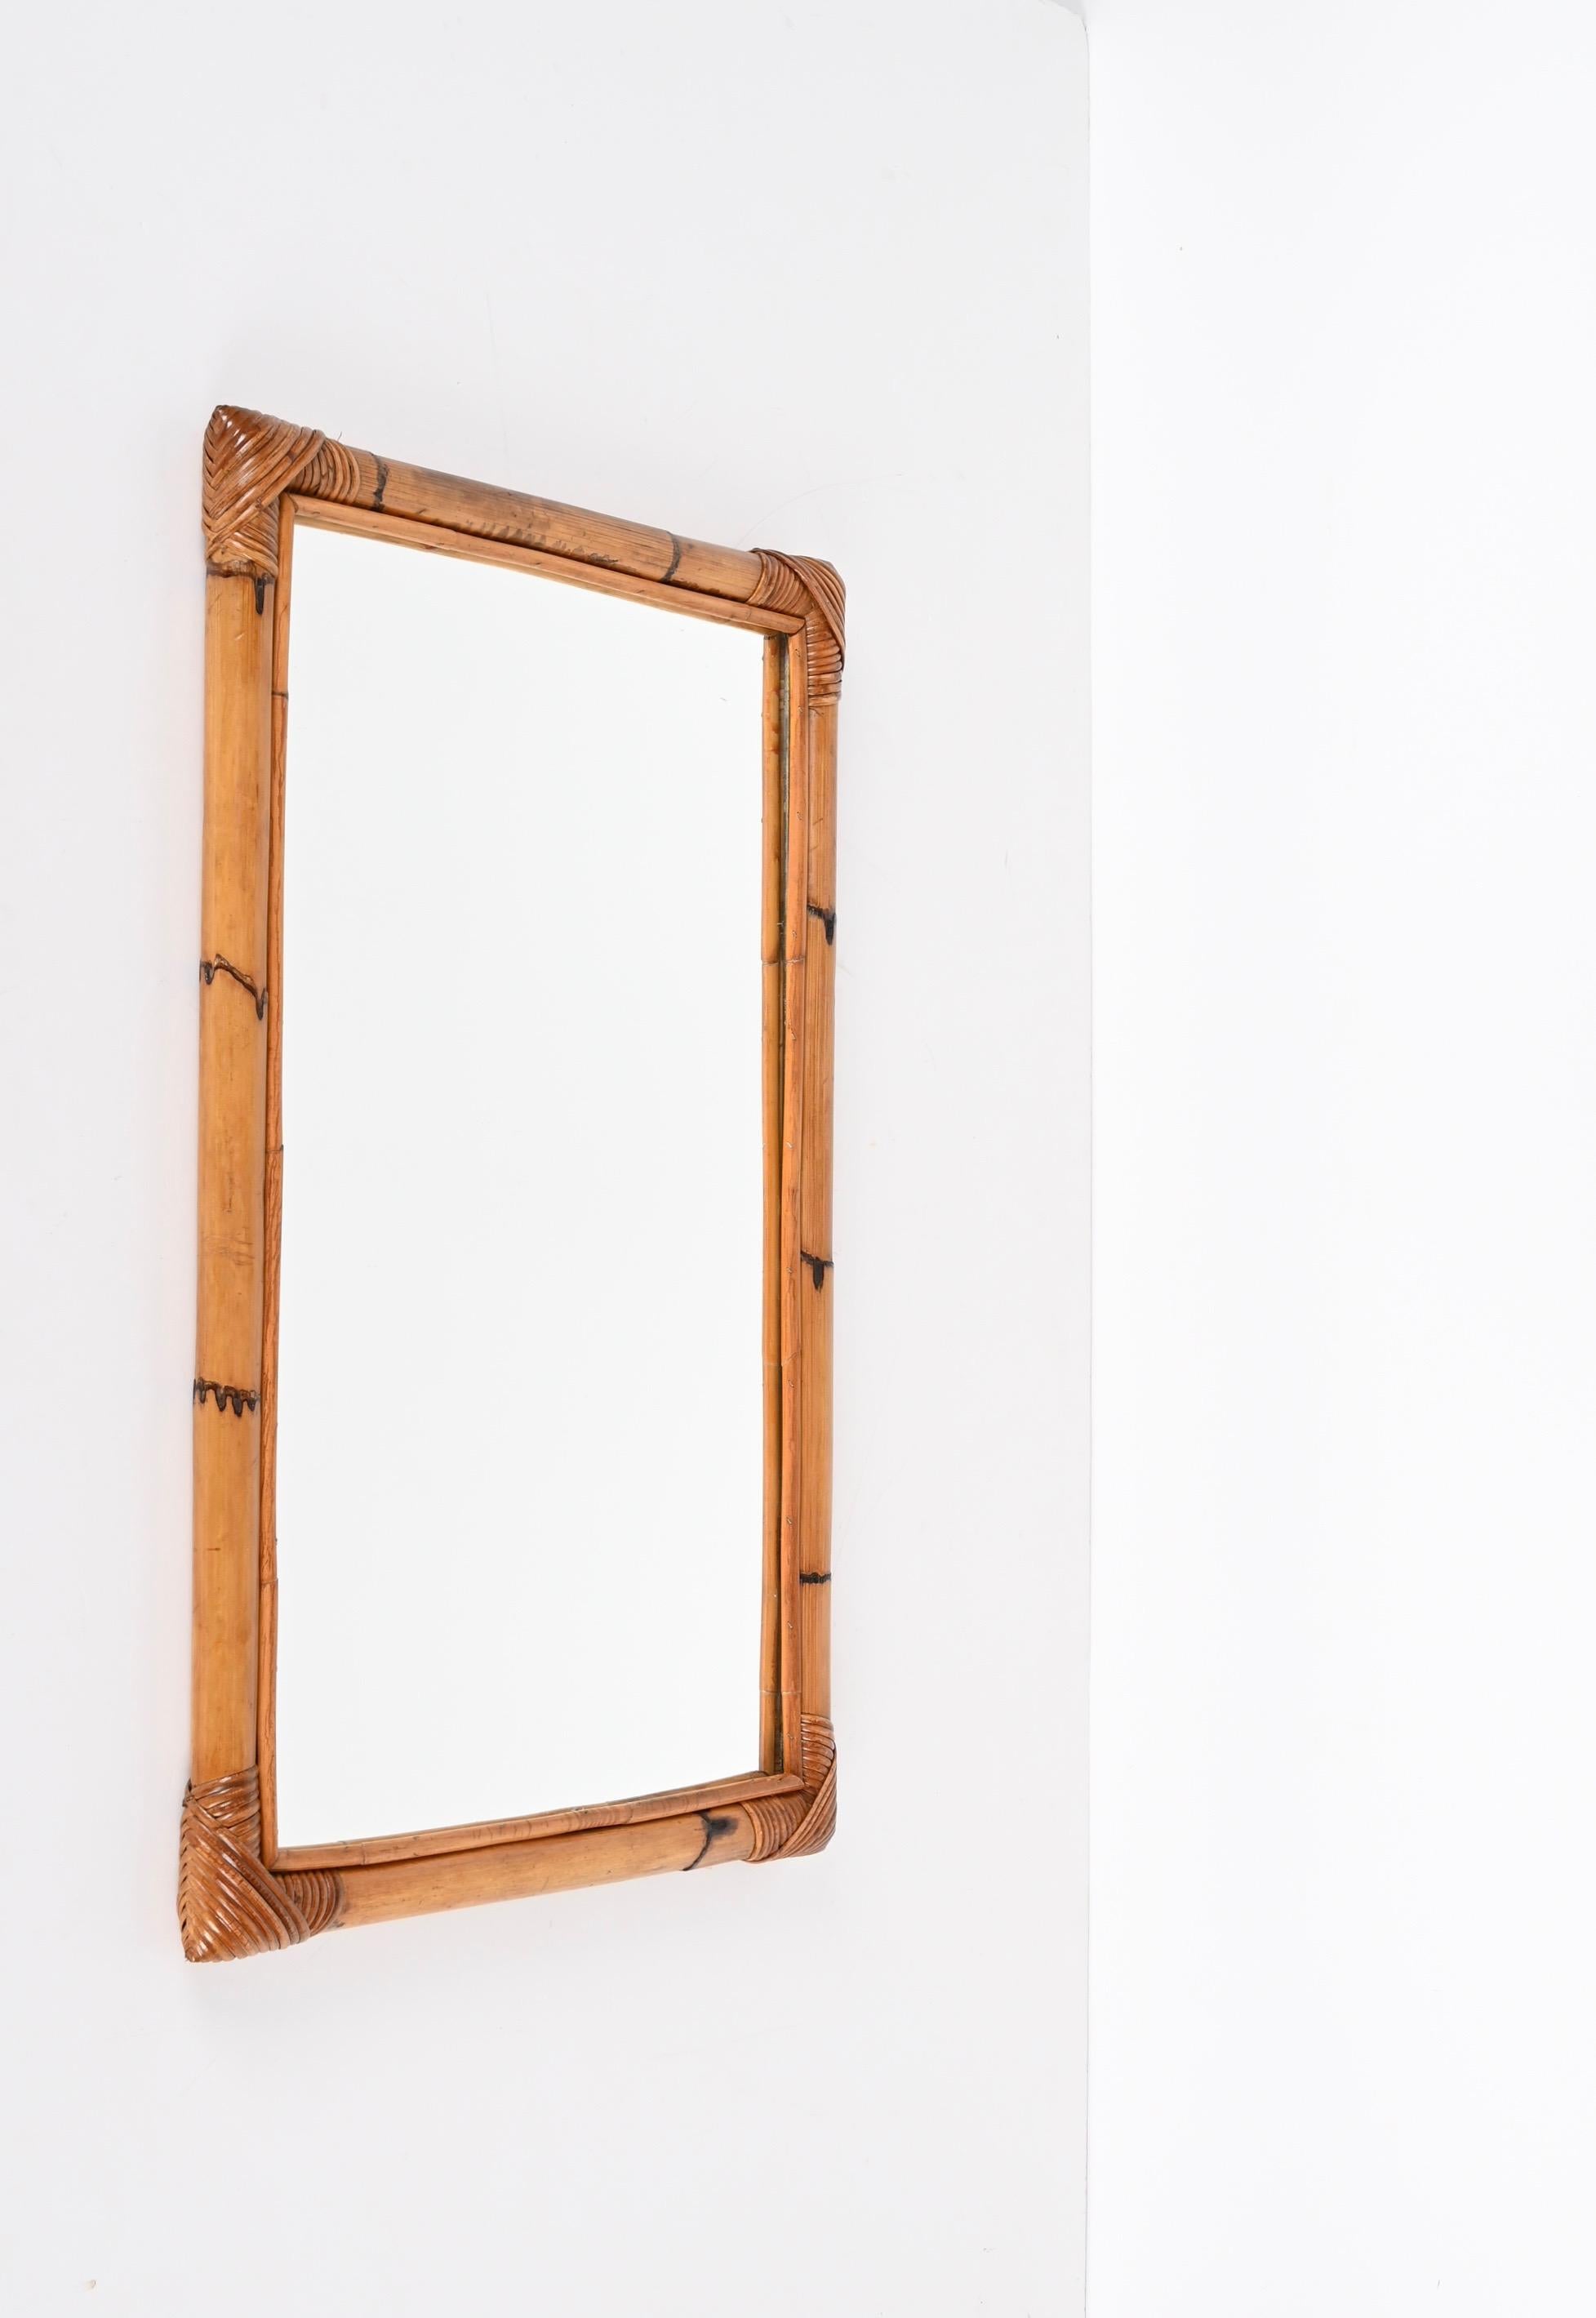 Midcentury Rectangular Italian Mirror with Double Bamboo Cane Frame, 1970s For Sale 4